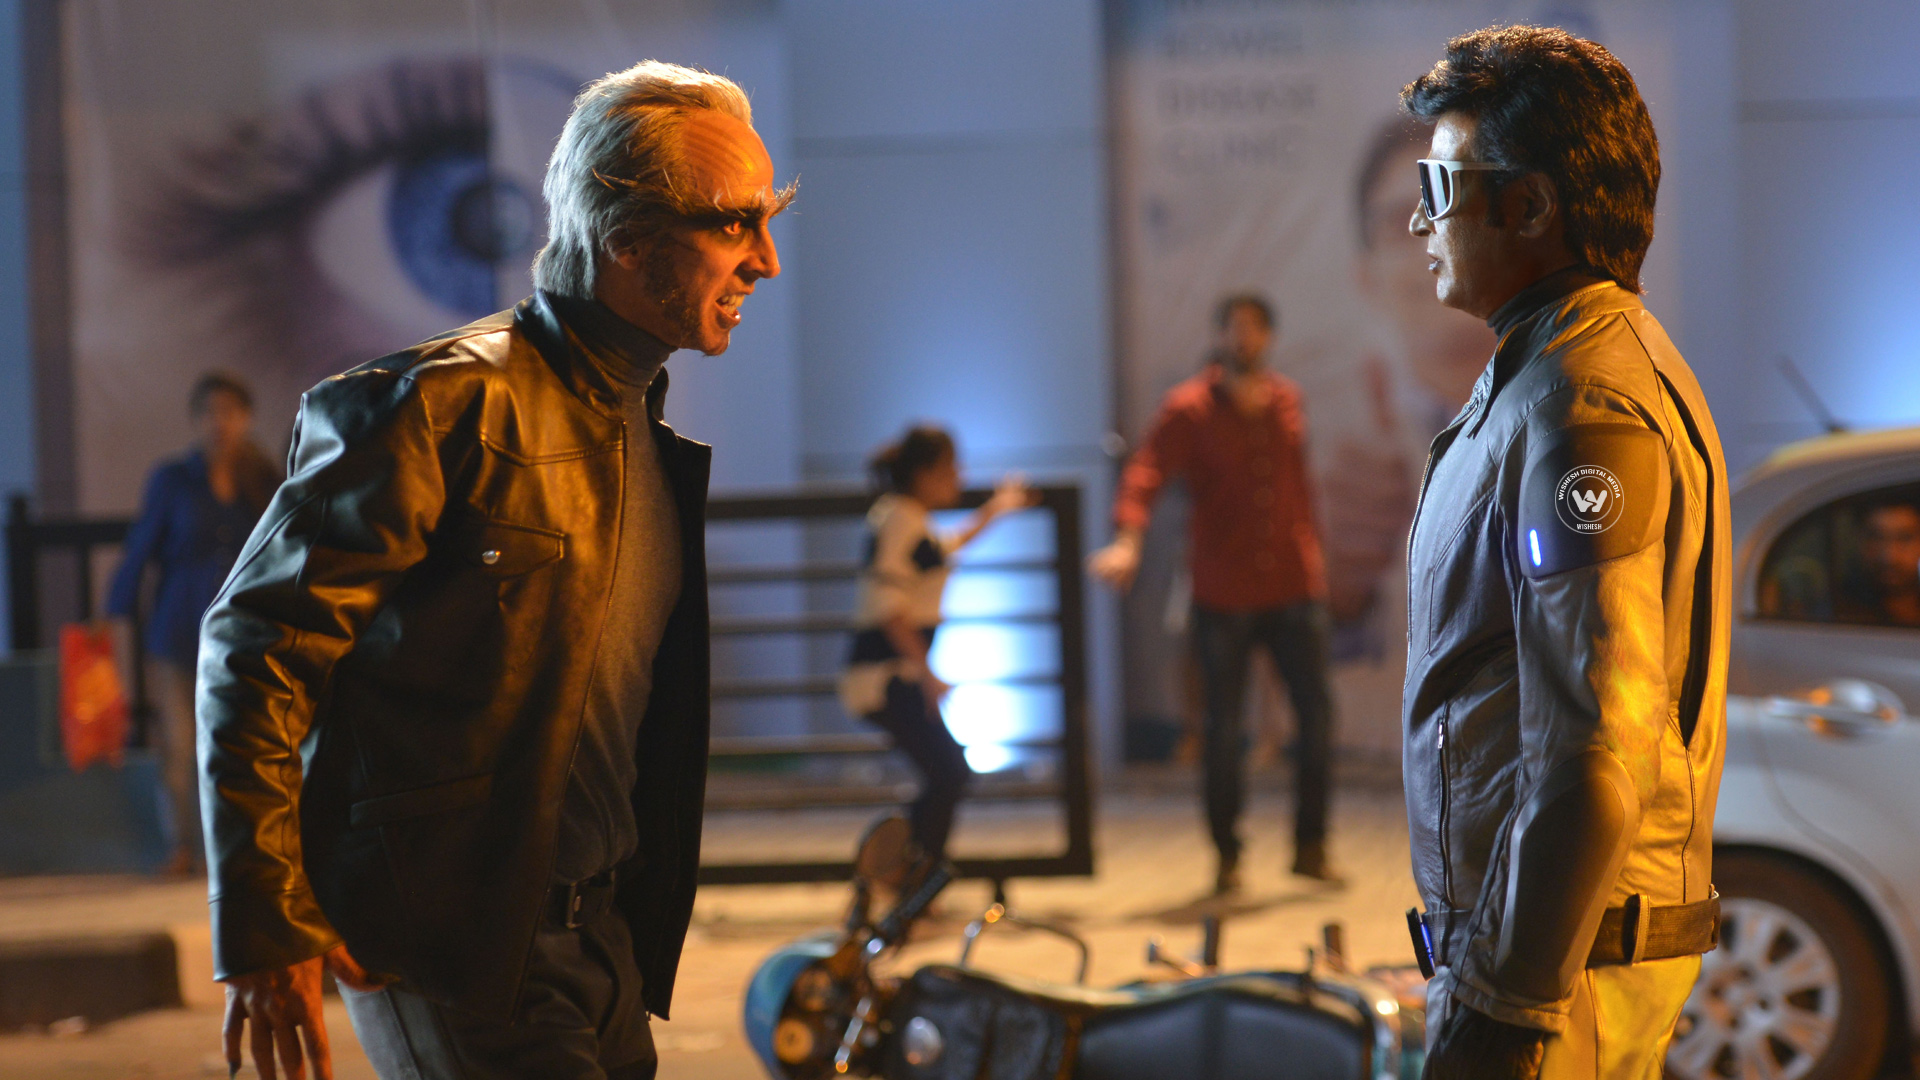 2.0 Movie HD Wallpapers | 2point0-wallpapers-08 | Wallpaper 8of 8 | 2.0 Movie Large Size wallpapers